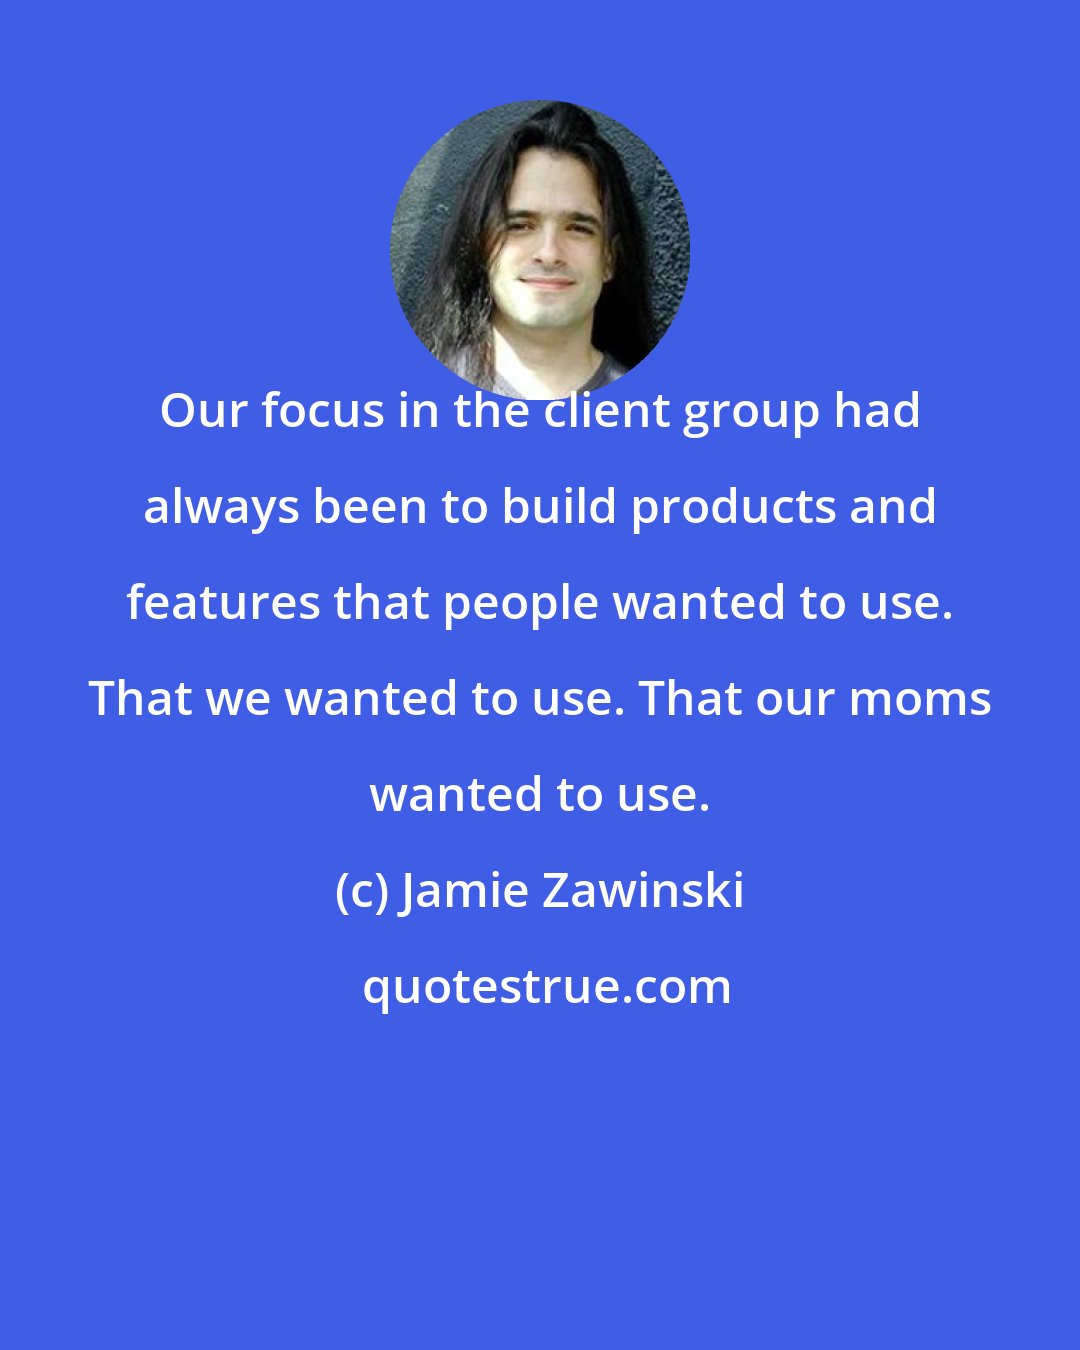 Jamie Zawinski: Our focus in the client group had always been to build products and features that people wanted to use. That we wanted to use. That our moms wanted to use.